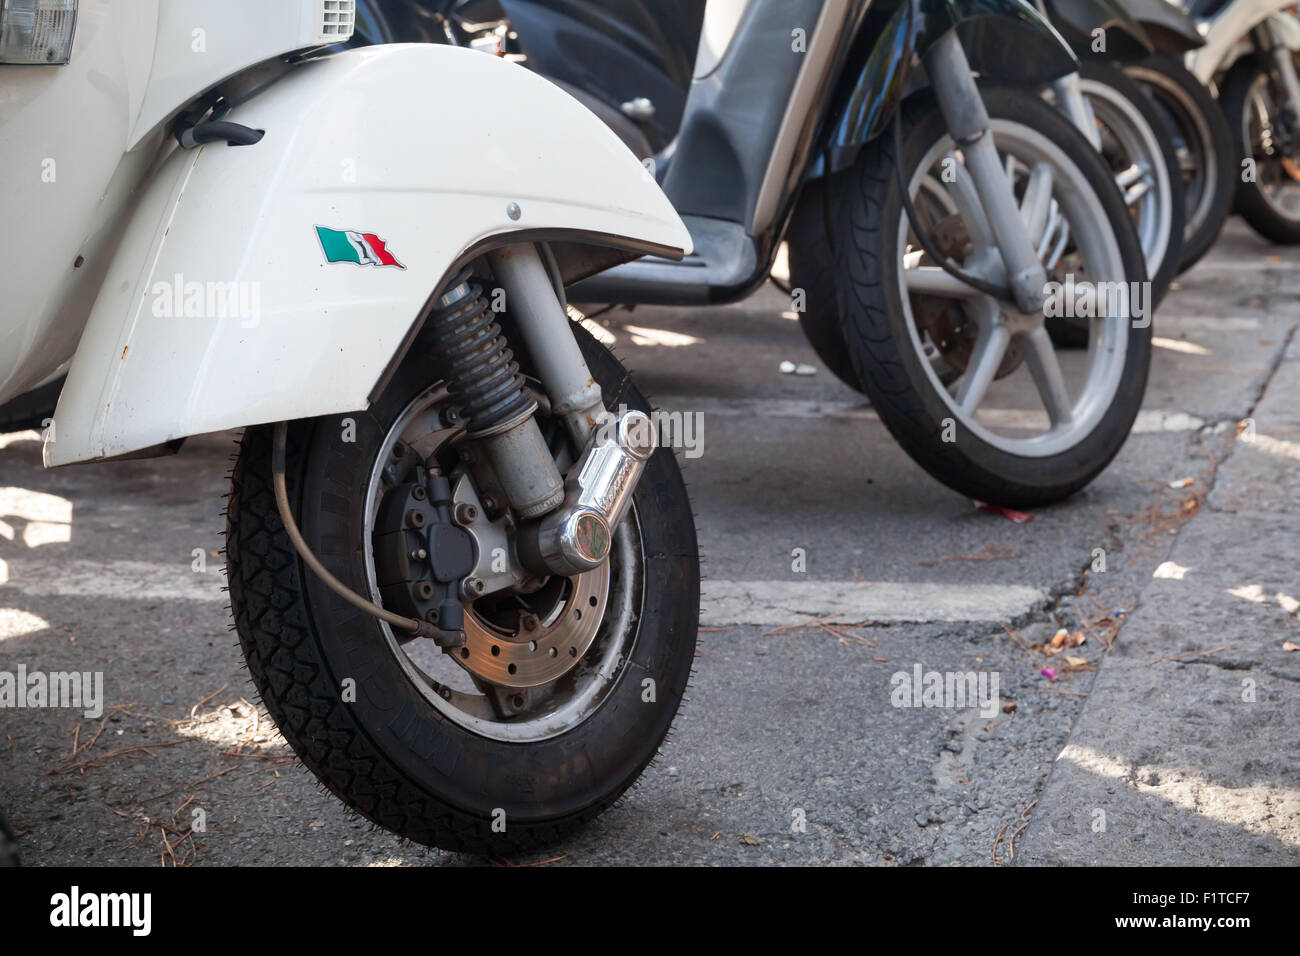 Ischia, Italy - August 15, 2015: Classic old style Vespa scooters stands parked on a roadside, fragment with front wheels Stock Photo